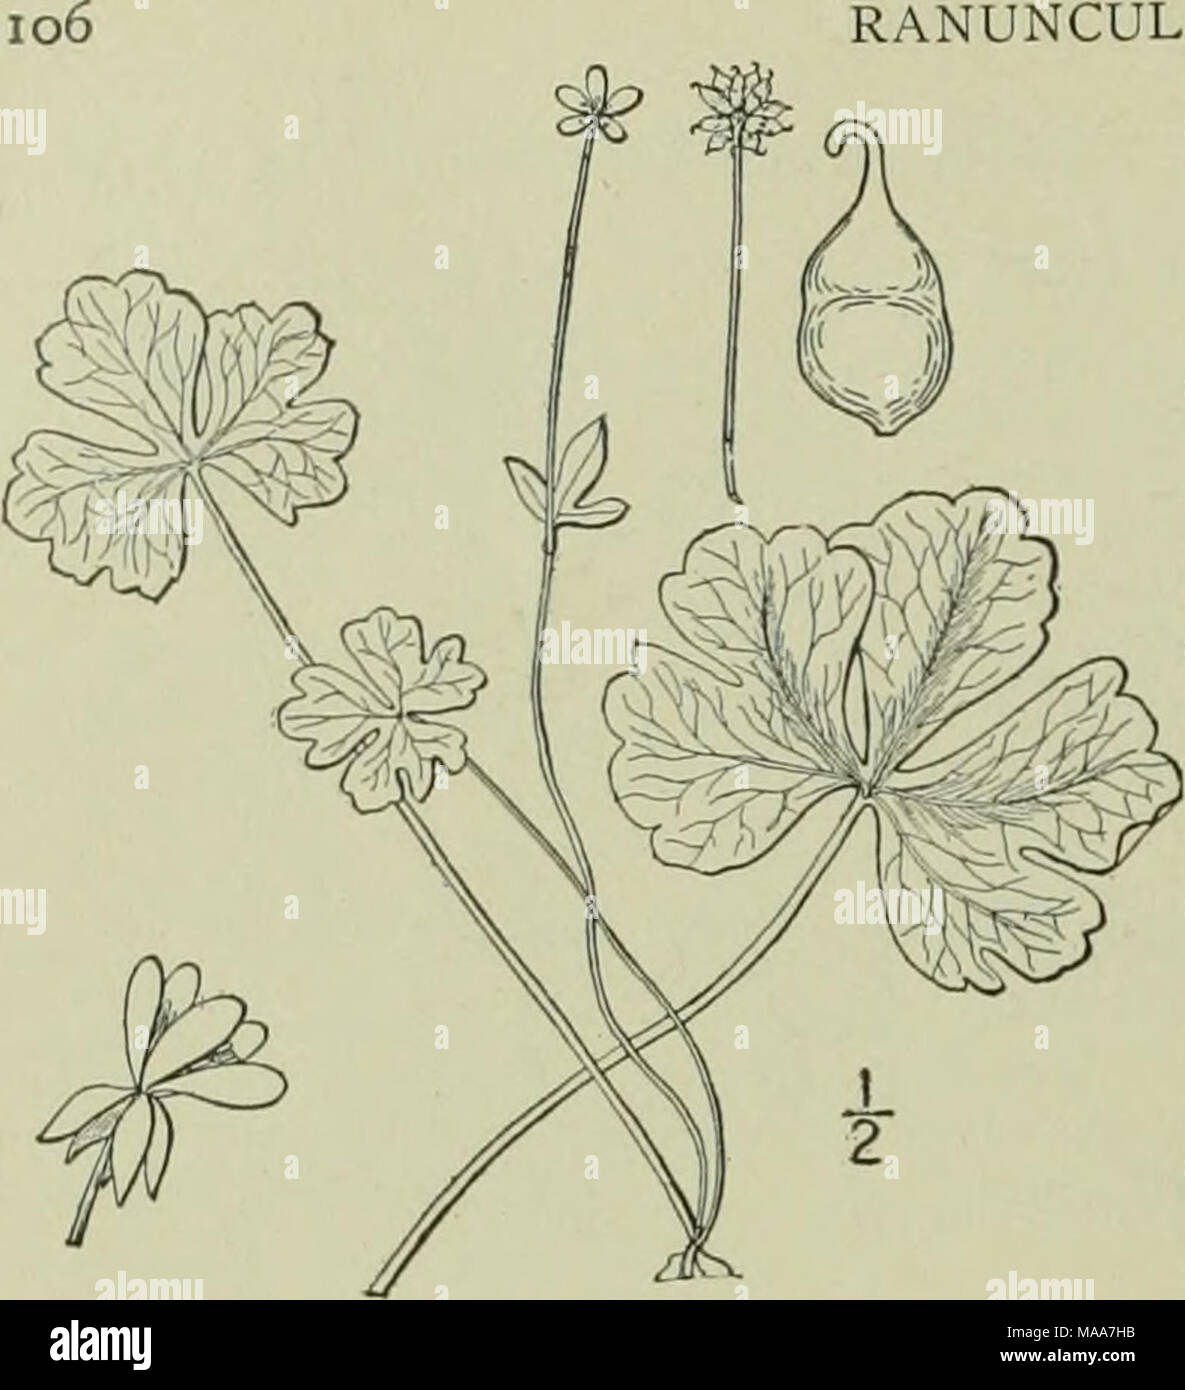 . An illustrated flora of the northern United States, Canada and the British possessions : from Newfoundland to the parallel of the southern boundary of Virginia and from the Atlantic Ocean westward to the 102nd meridian . 5. Ranunculus pusillus Poir. Low Spearwort. Fig. 1899. R. tiisilltis Poir. in Lam. Encycl. 6: 99. 1804. Annual, slender, weak, glabrous, branching, 6'-i8' long. Leaves entire or denticulate, the lower oblong or ovate, sometimes cordate, on long petioles, the upper narrower, lanceolate or linear, short-petioled or sessile; flowers yel- low, 2&quot;-3&quot; broad, the petals f Stock Photo